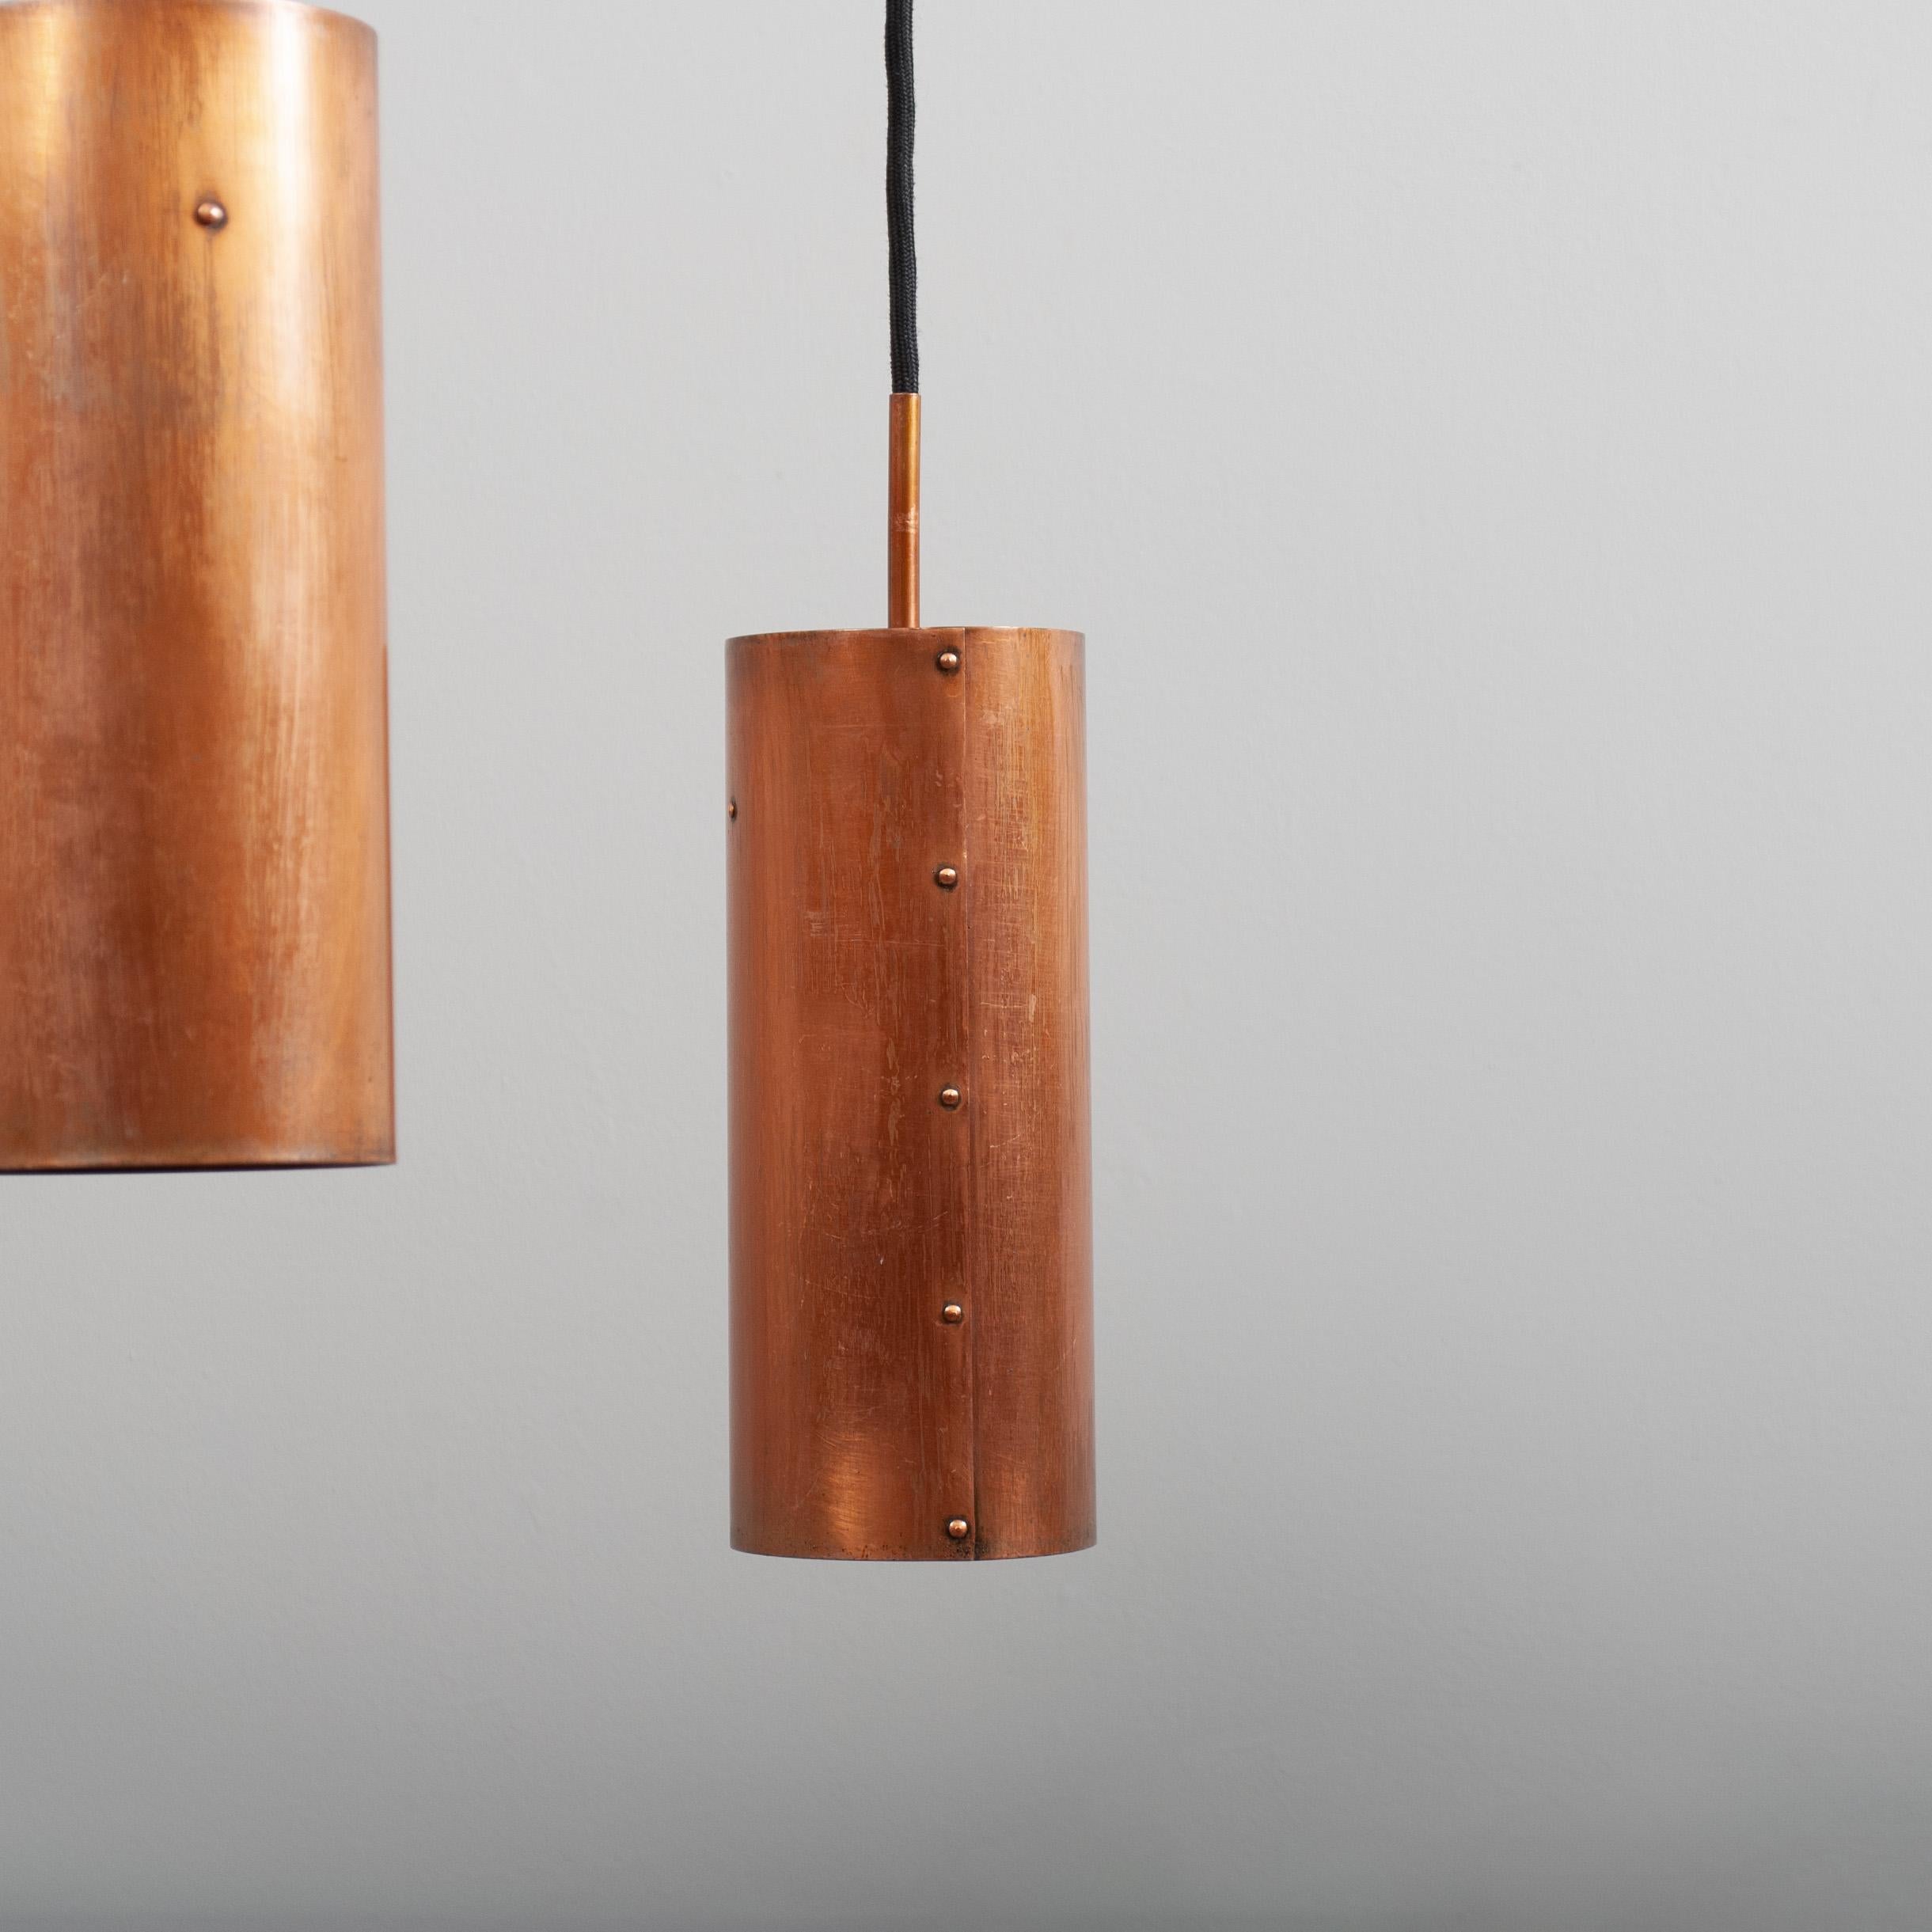 An idiosyncratic handcrafted Modernist Danish triple drop pendant light. Constructed from solid copper with a curved copper yoke which suspends 3 riveted copper cylinders - by moving the yoke up/down these can be a graduated drop or lined up level